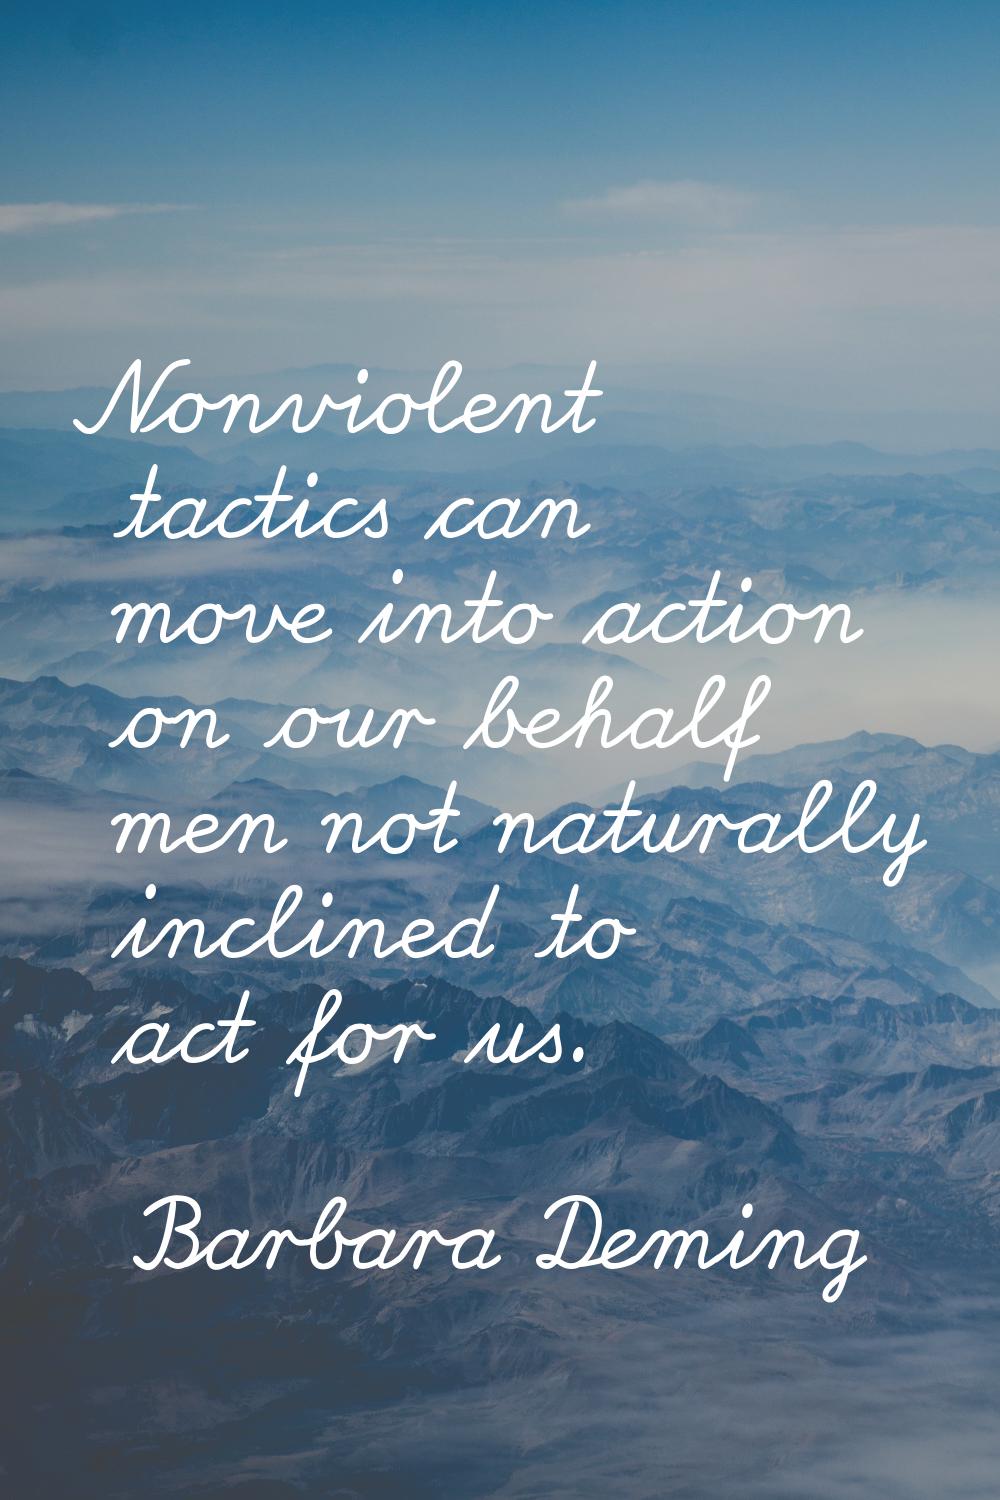 Nonviolent tactics can move into action on our behalf men not naturally inclined to act for us.